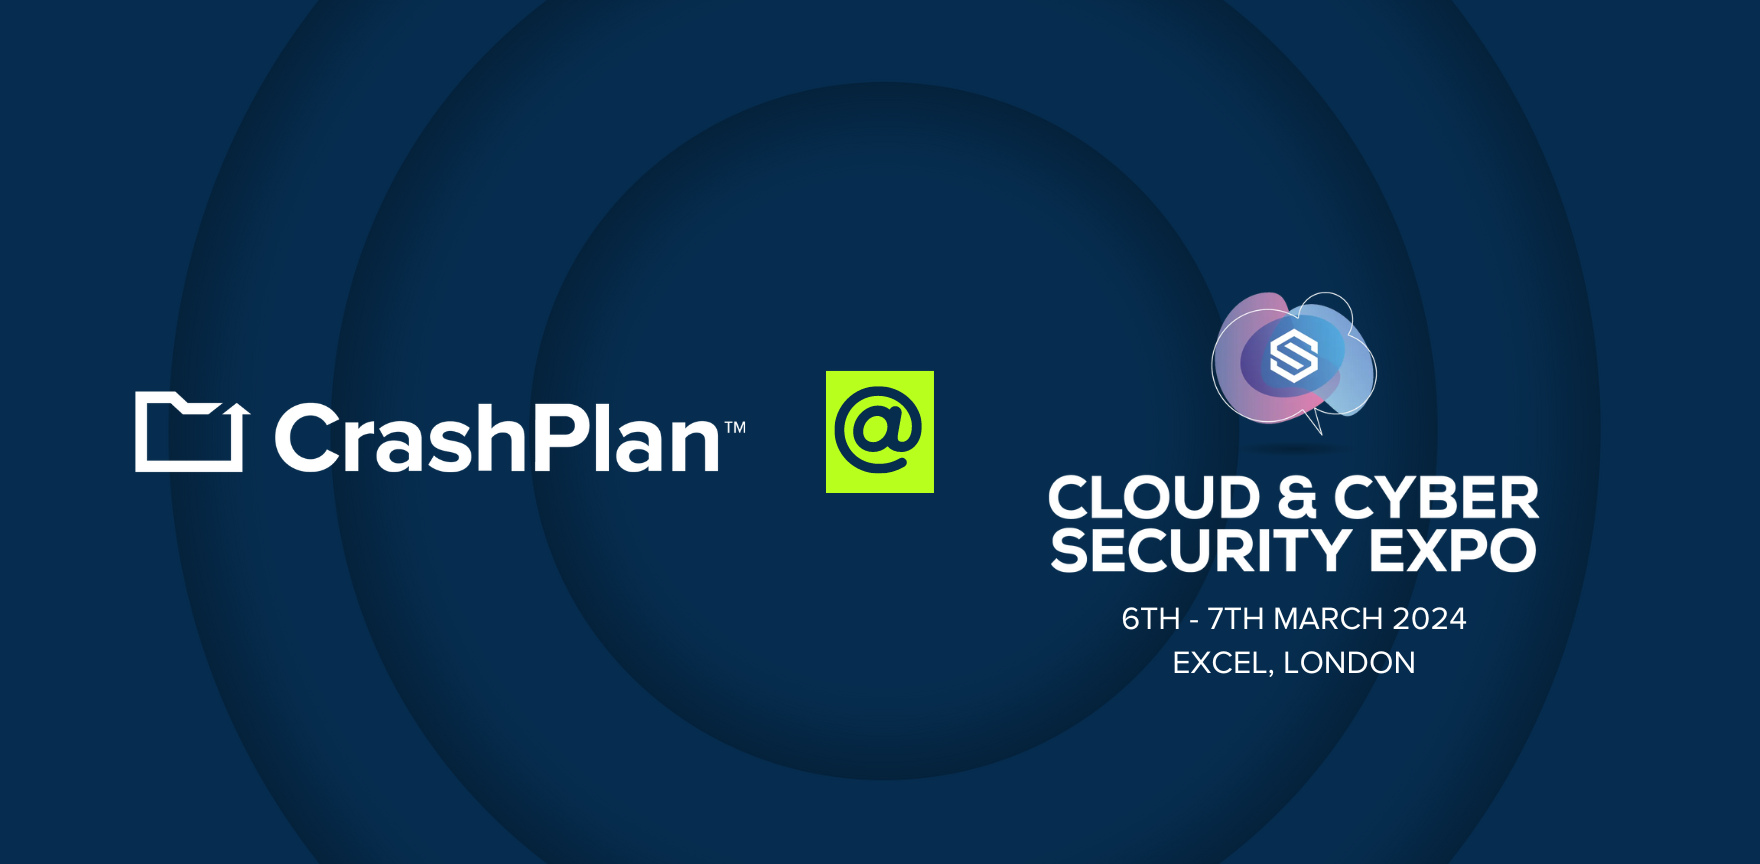 Promotional banner for CrashPlan at Cloud & Cyber Security Expo, 6-7 Mar 2024 in London